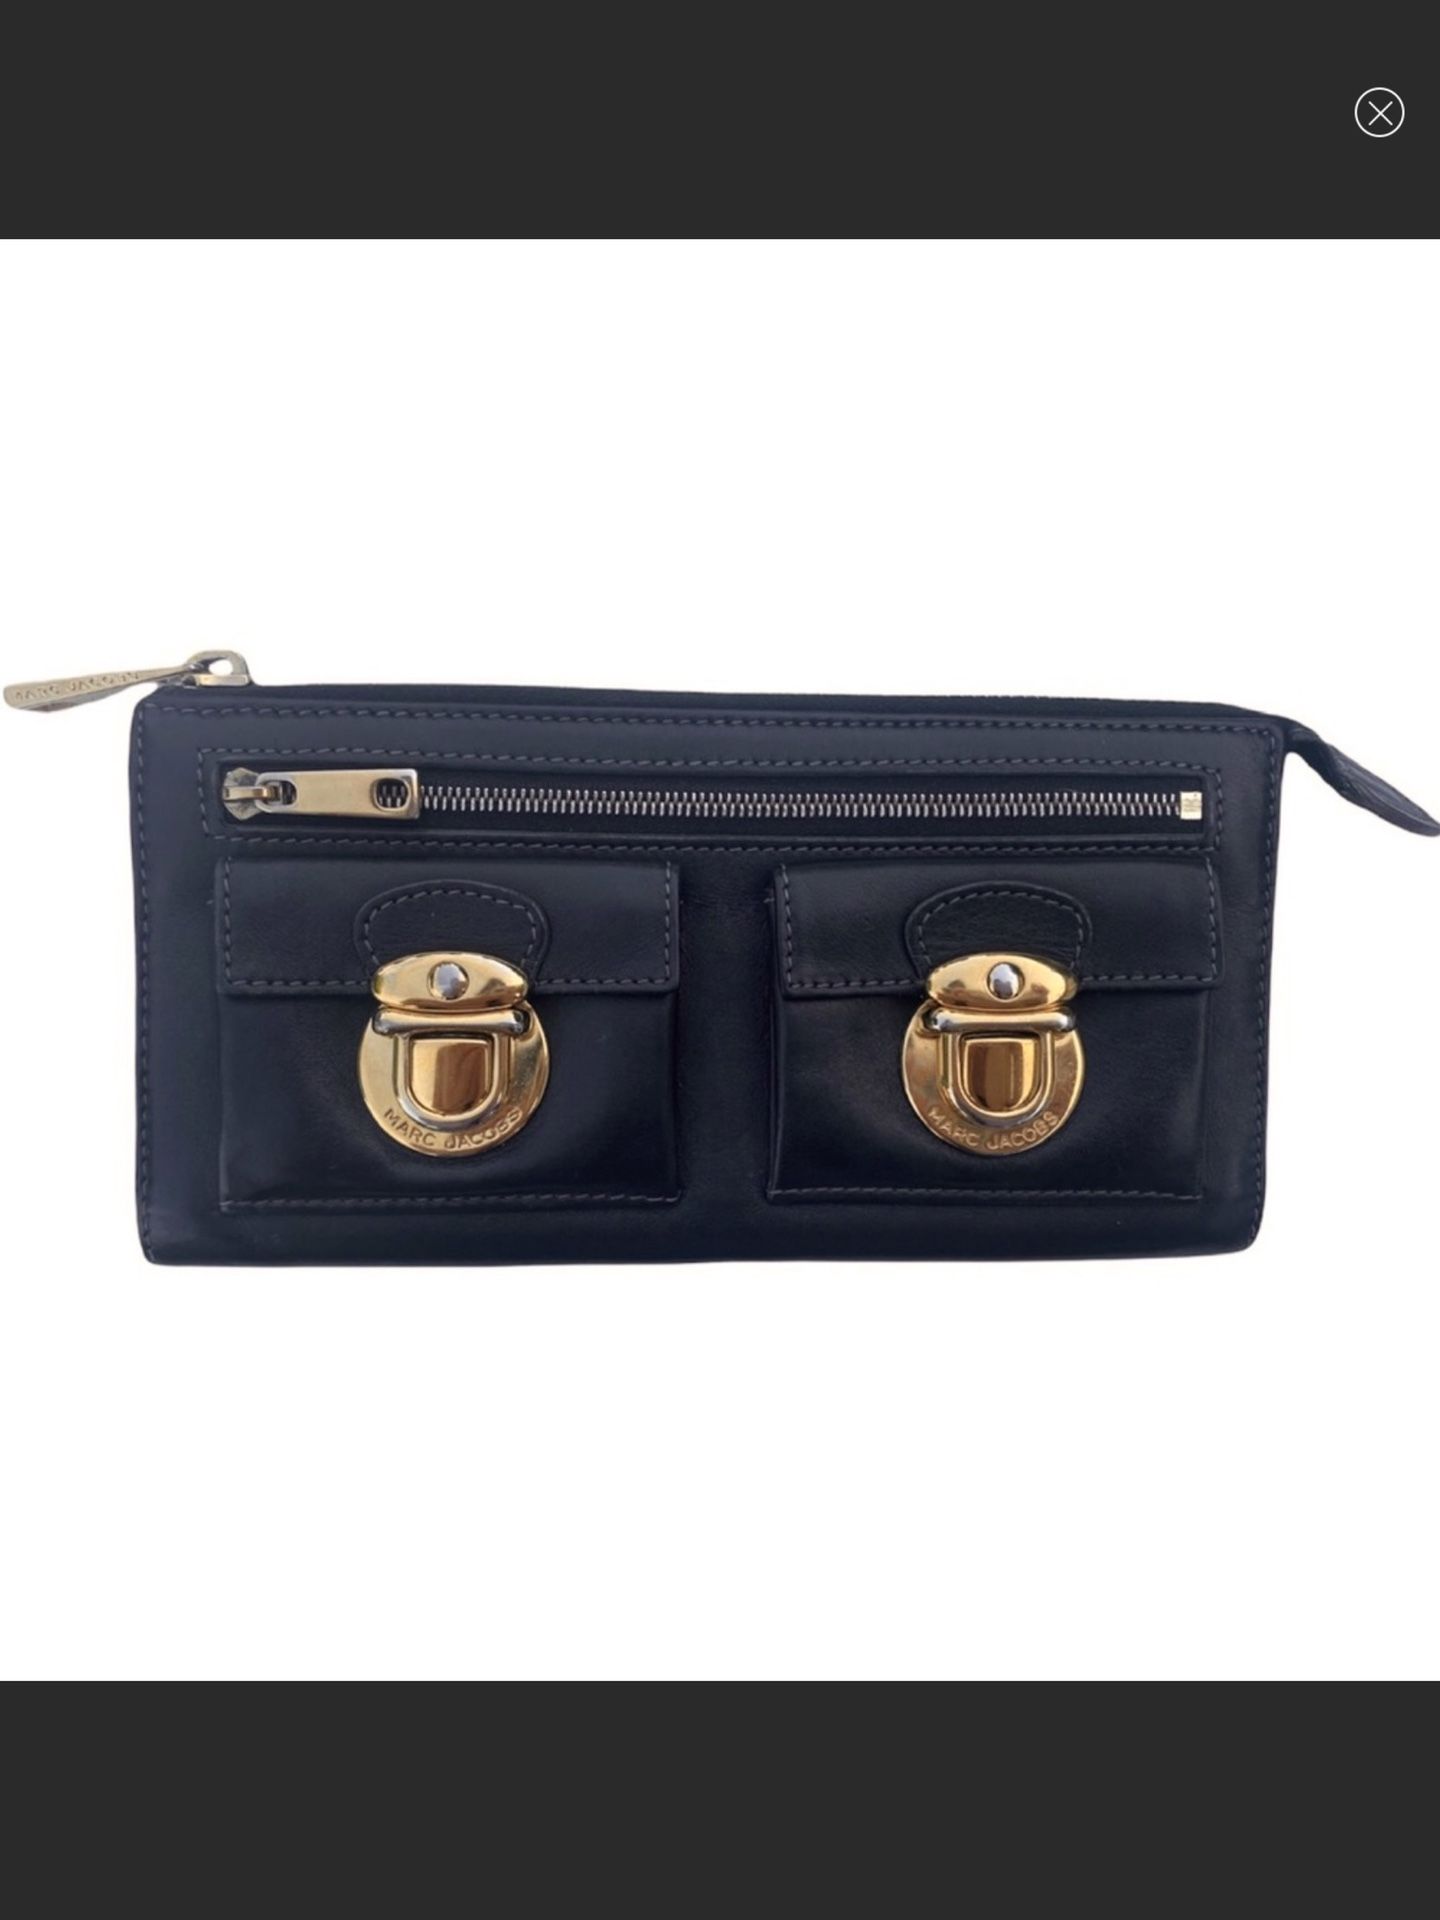 Marc Jacobs zippered black leather wallet